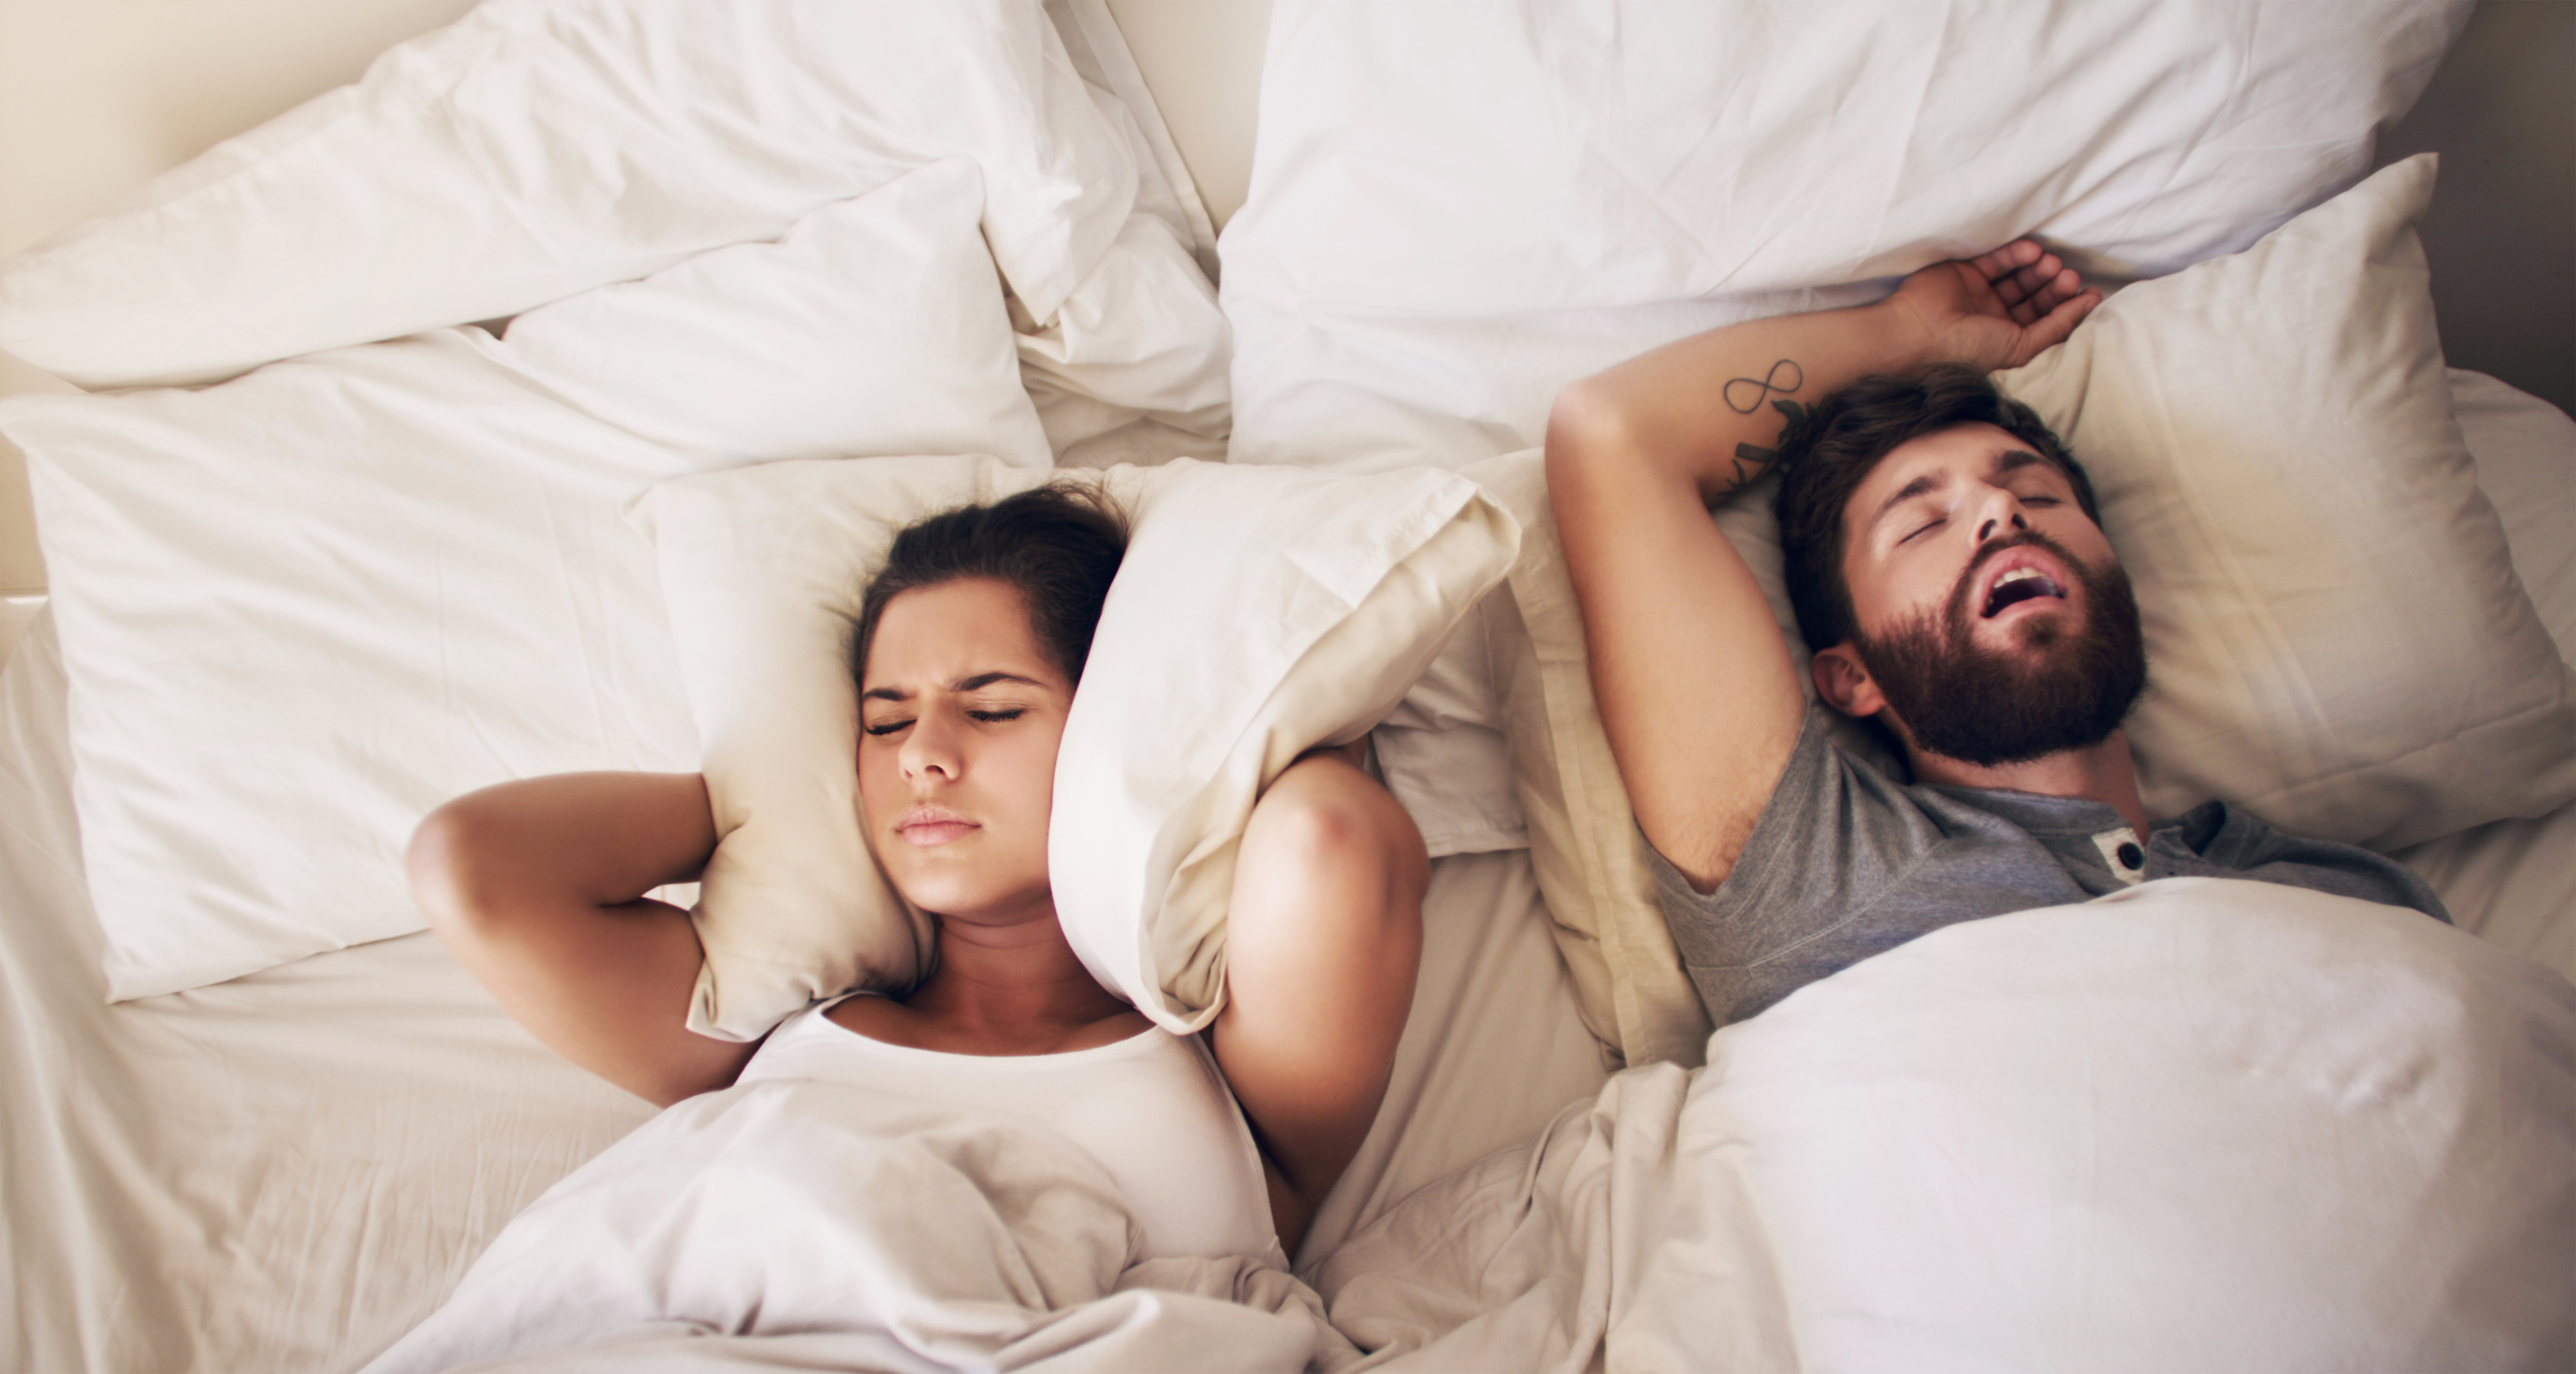 Two people lying in bed with one snoring and the other appearing frustrated